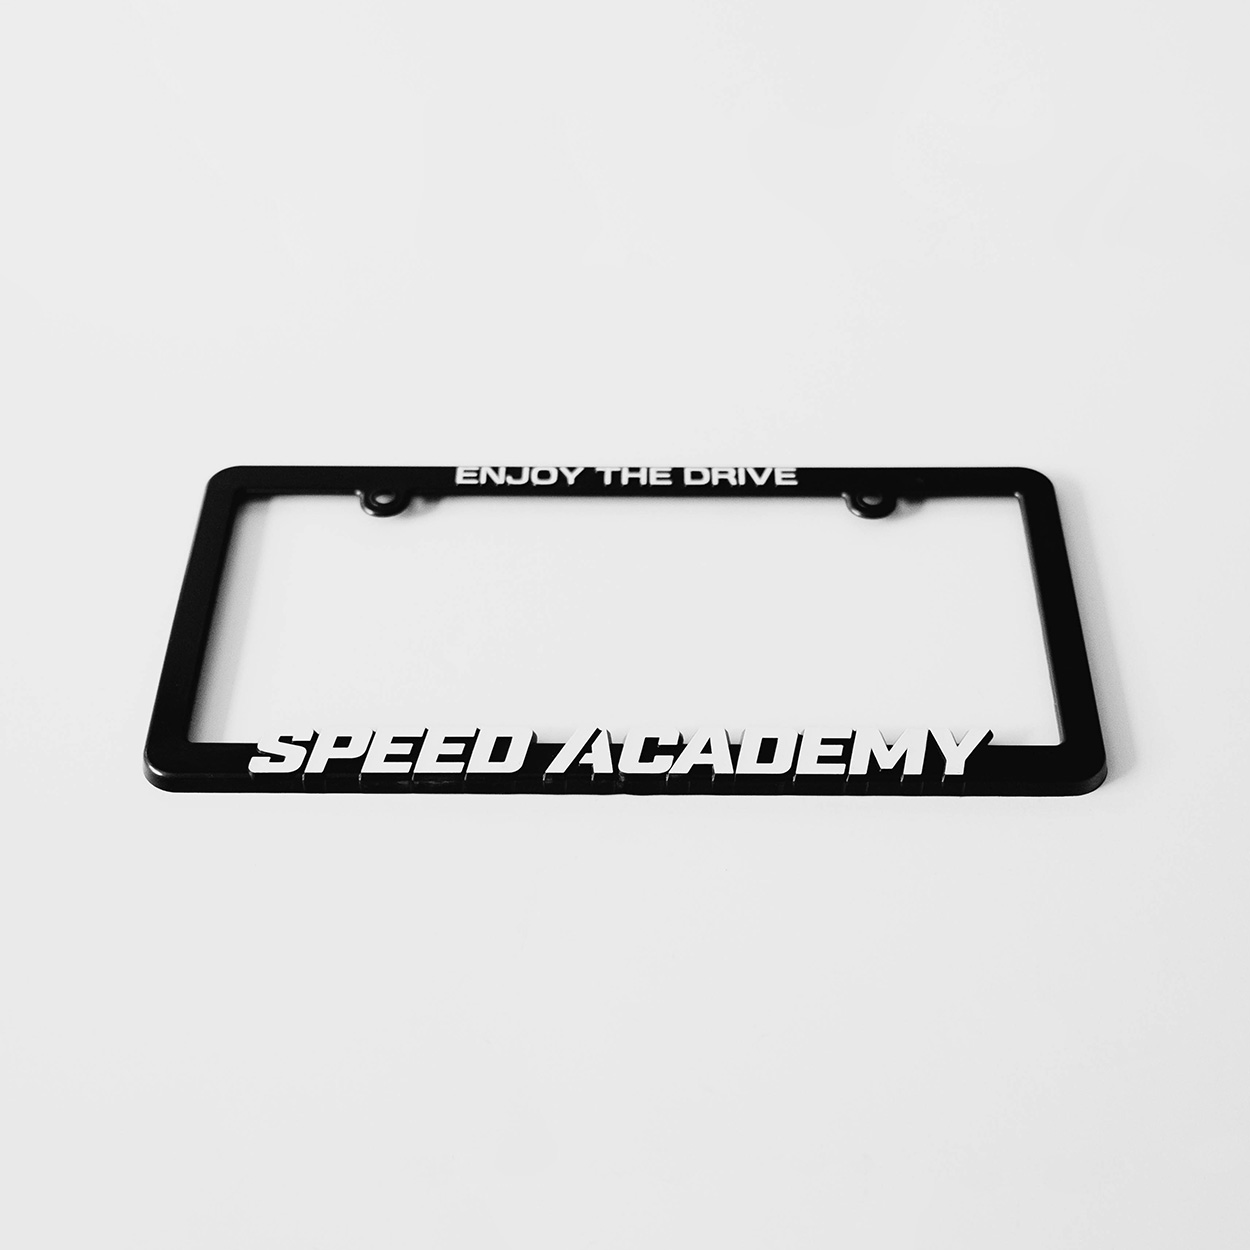 Speed Academy - Enjoy the Drive License Plate Frame